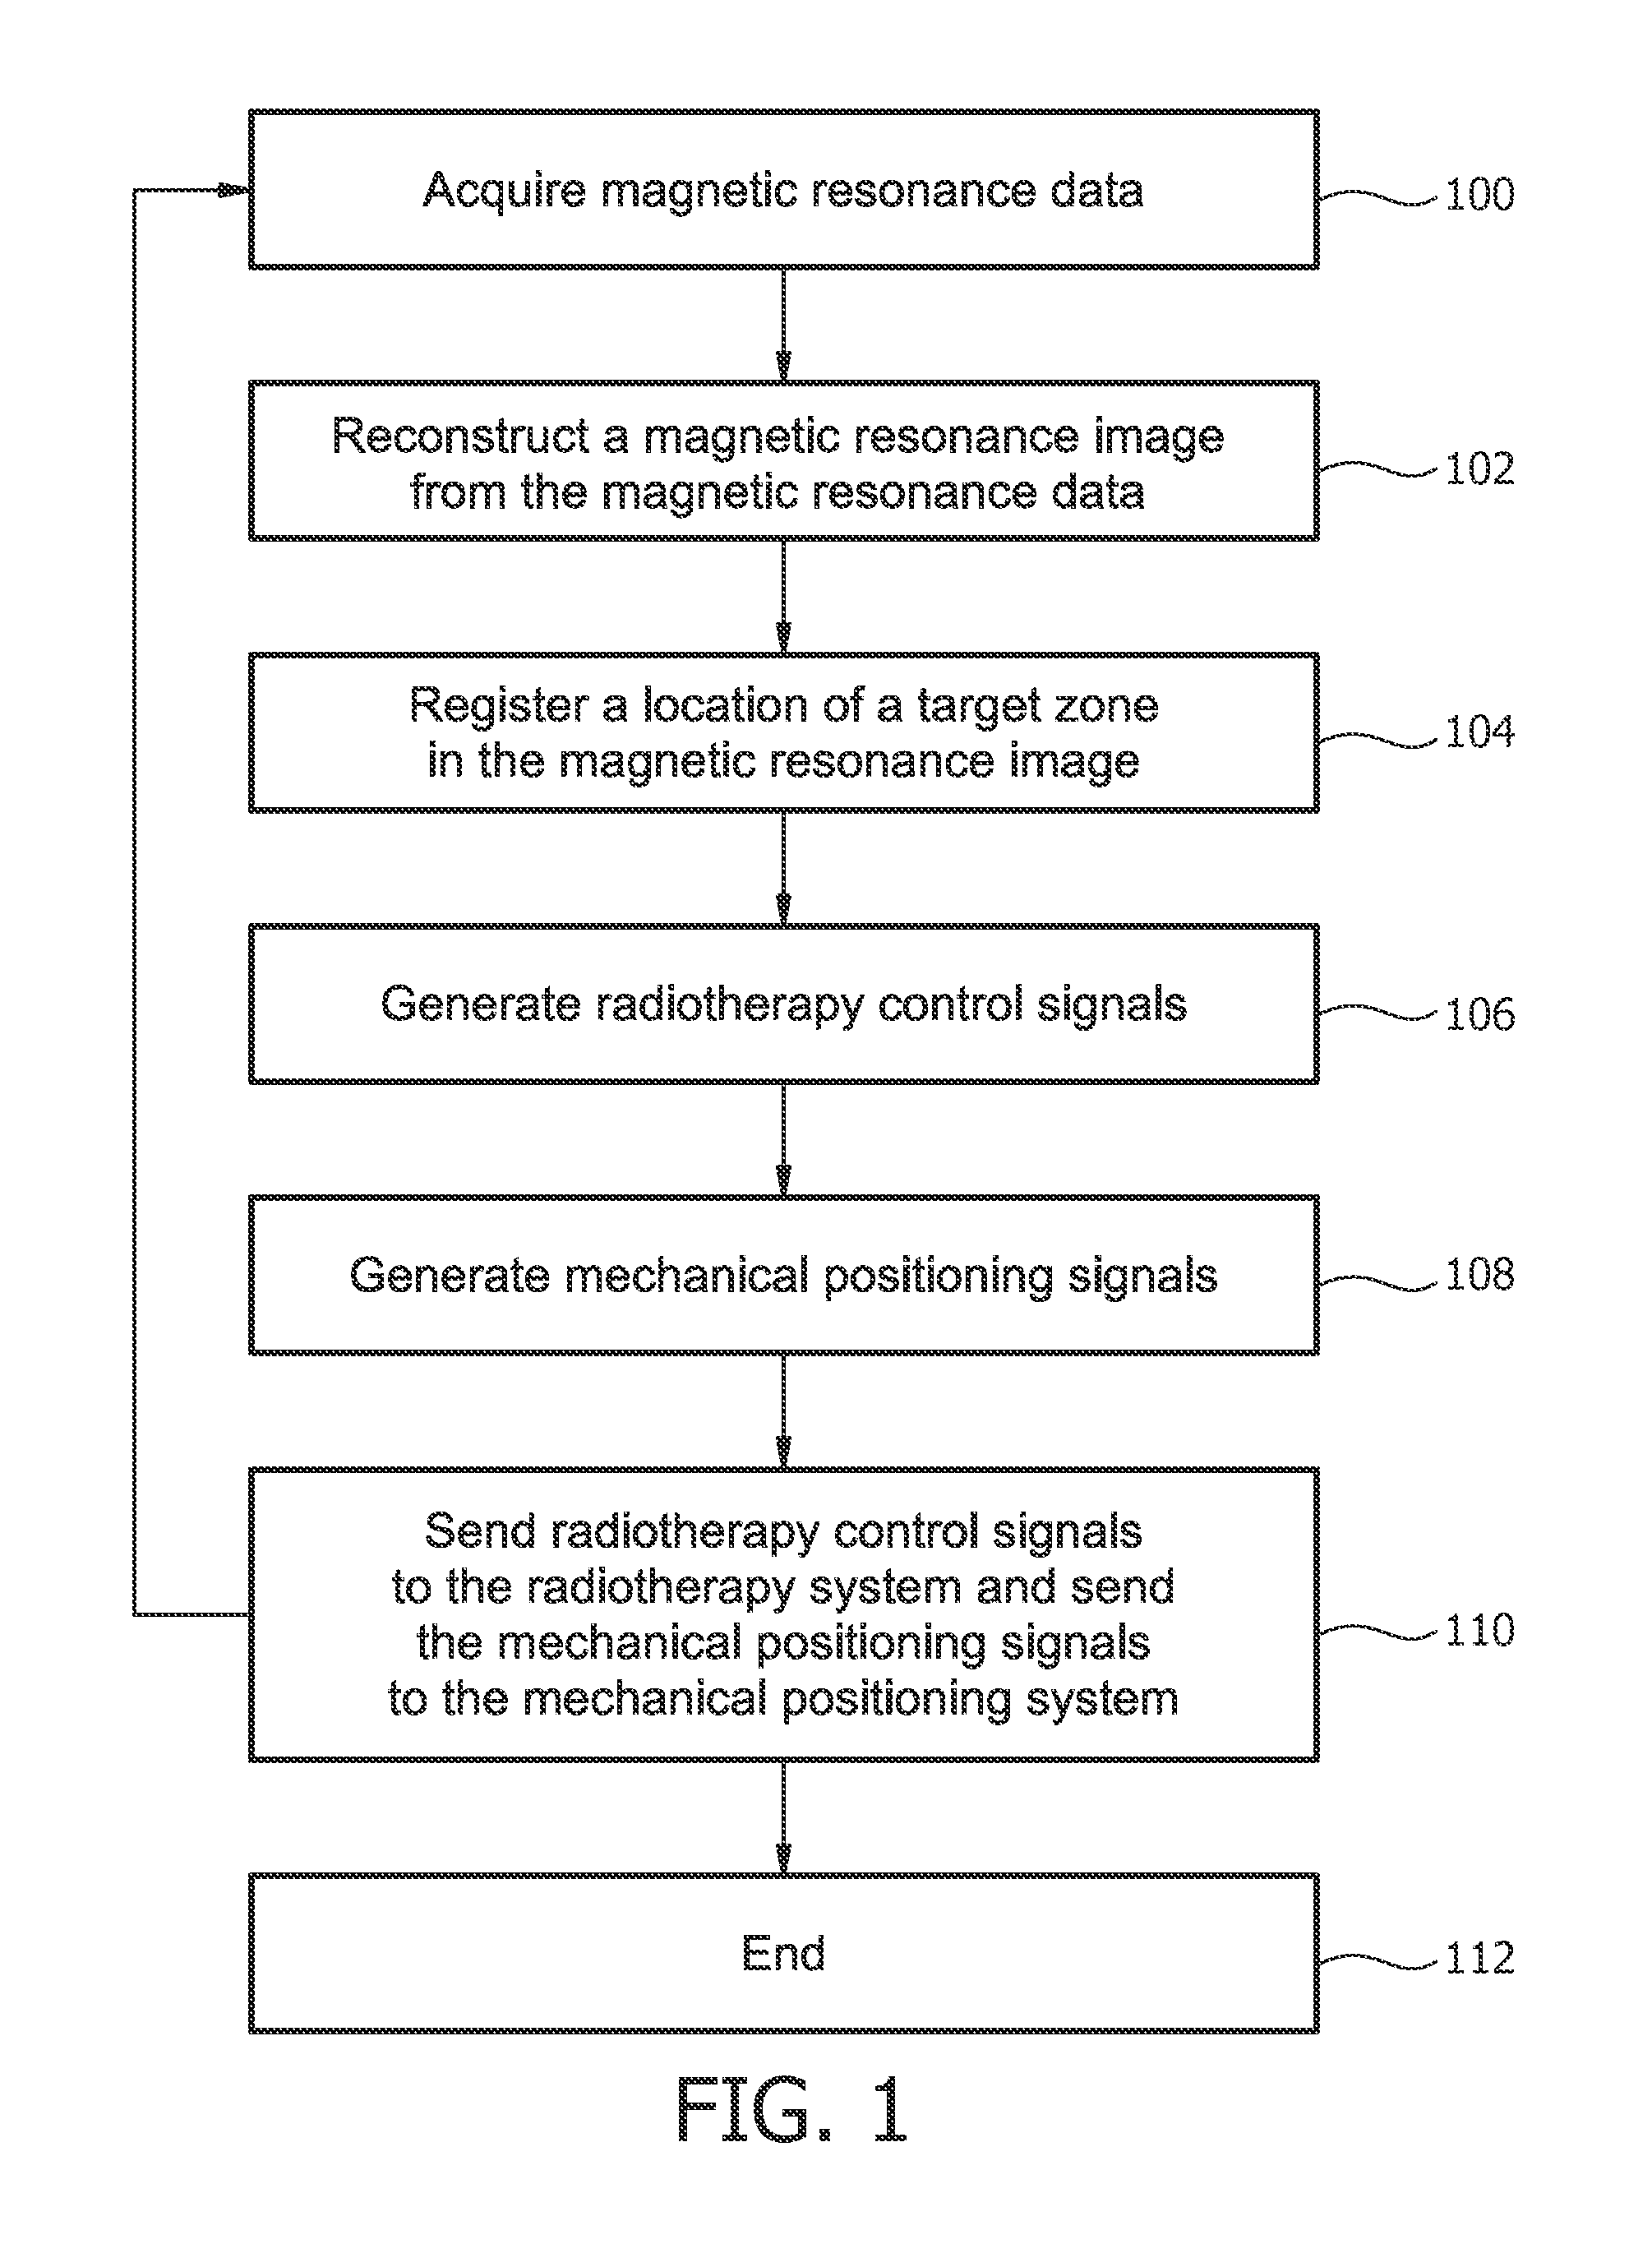 Therapeutic apparatus comprising a radiotherapy apparatus, a mechanical positioning system, and a magnetic resonance imaging system